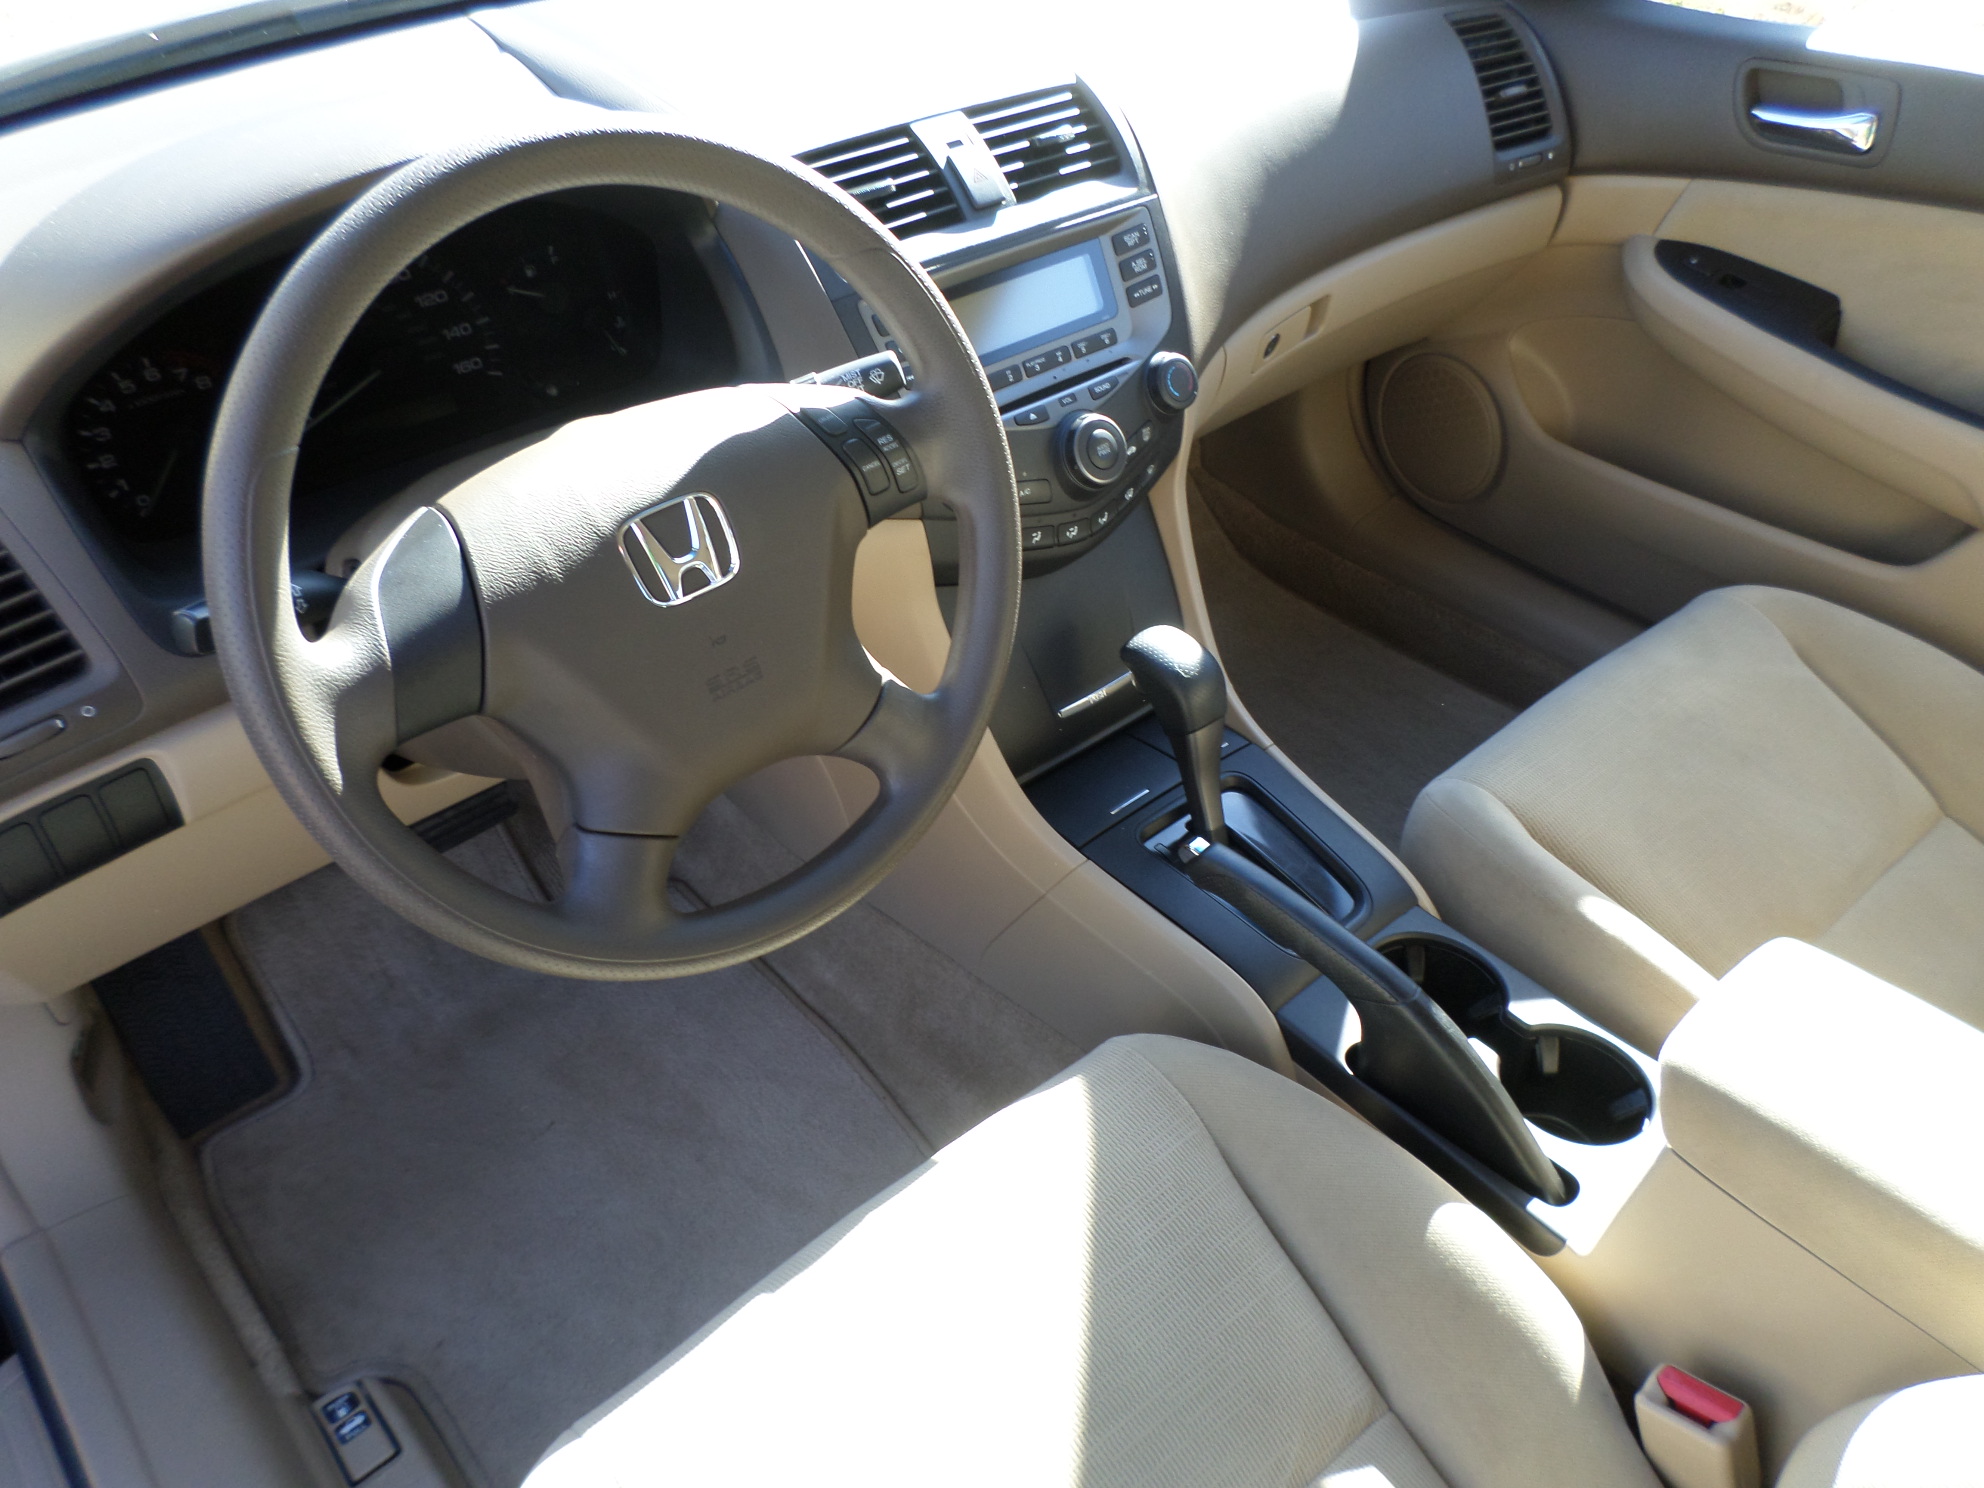 Copy of Interior Car Detailing in Central Minnesota